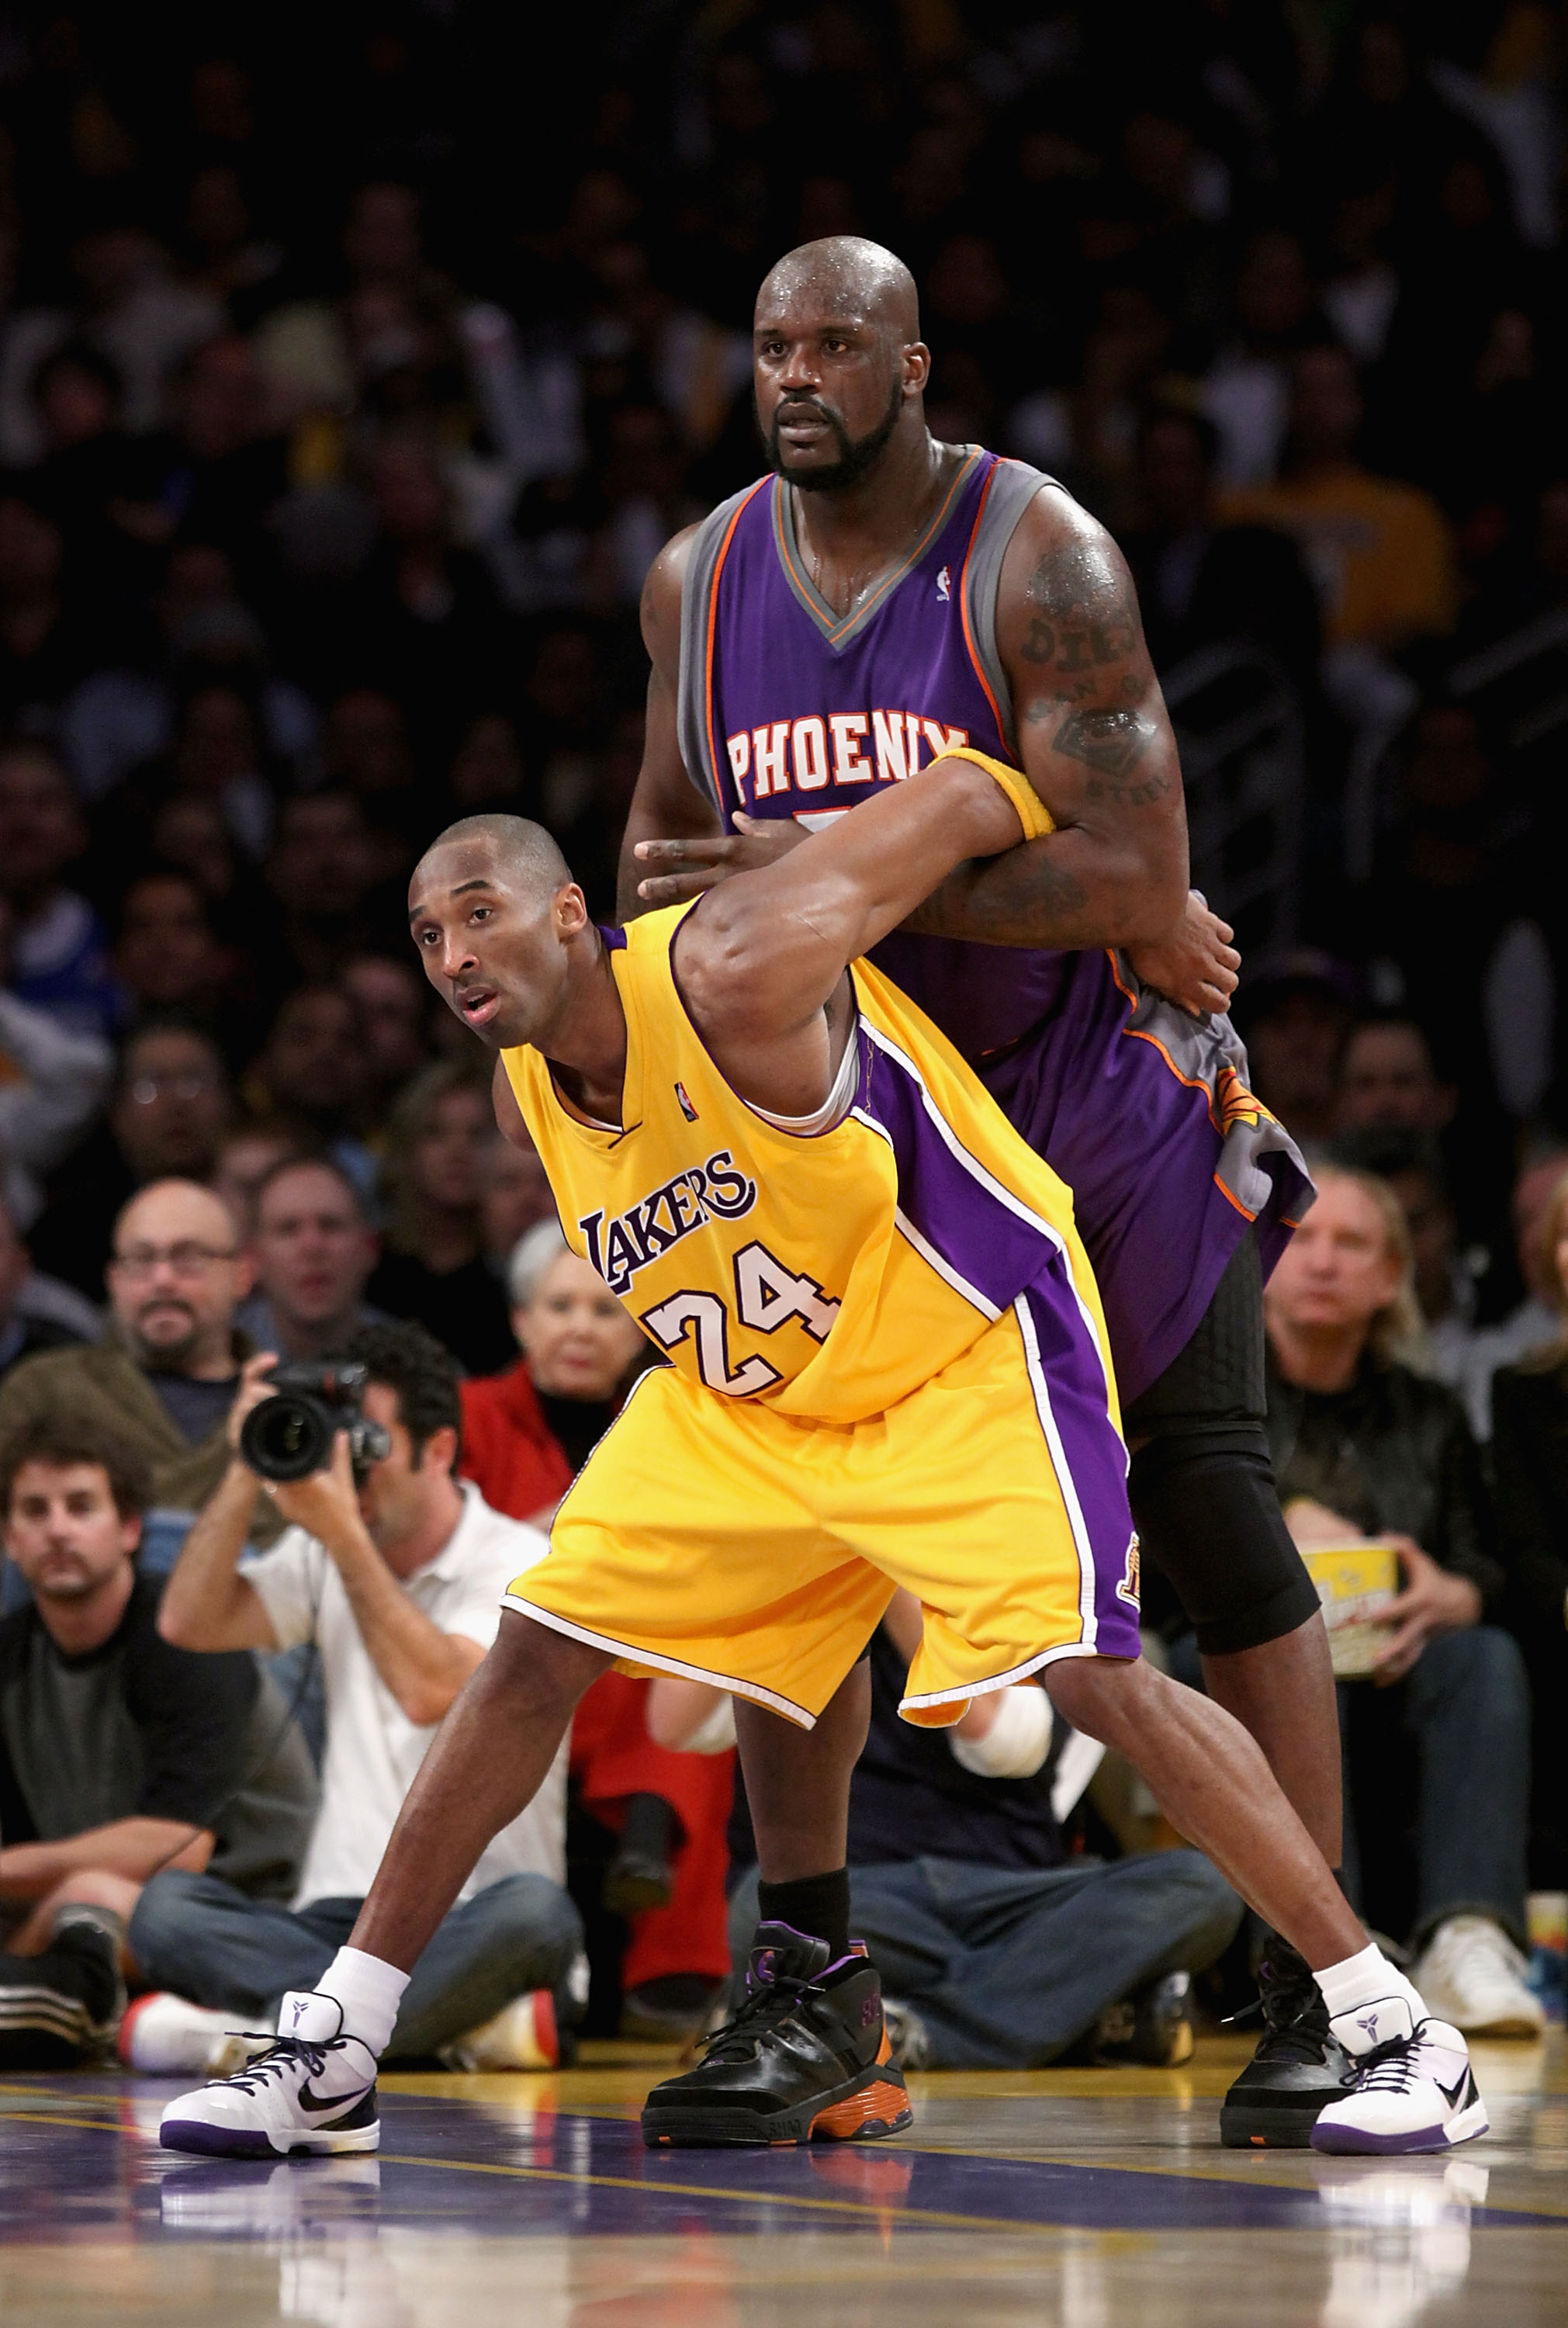 LOS ANGELES, CA - FEBRUARY 26:  Kobe Bryant #24 of the Los Angeles Lakers guards Shaquille O'Neal #32 of the Phoenix Suns during the NBA game at Staples Center February 26, 2009 in Los Angeles, California.  NOTE TO USER: User expressly acknowledges and ag